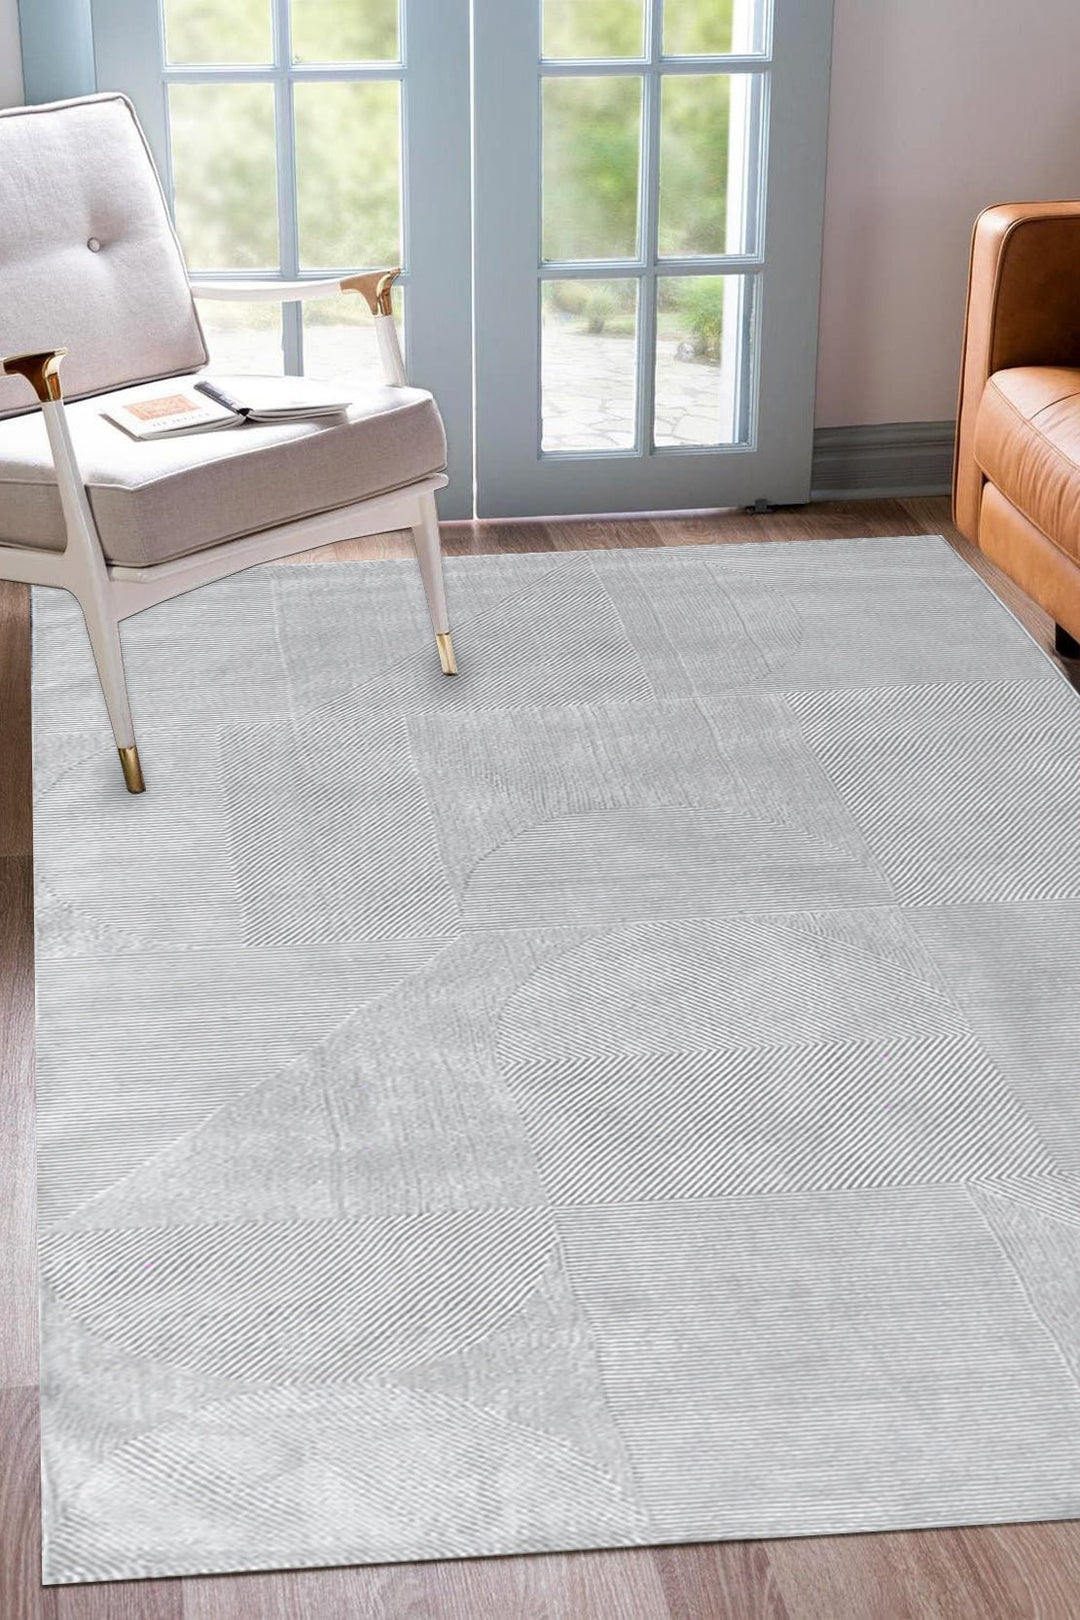 Turkish Modern Festival -1 Rug - 6.6 x 9.8 FT - White - Sleek and Minimalist for Chic Interiors - V Surfaces